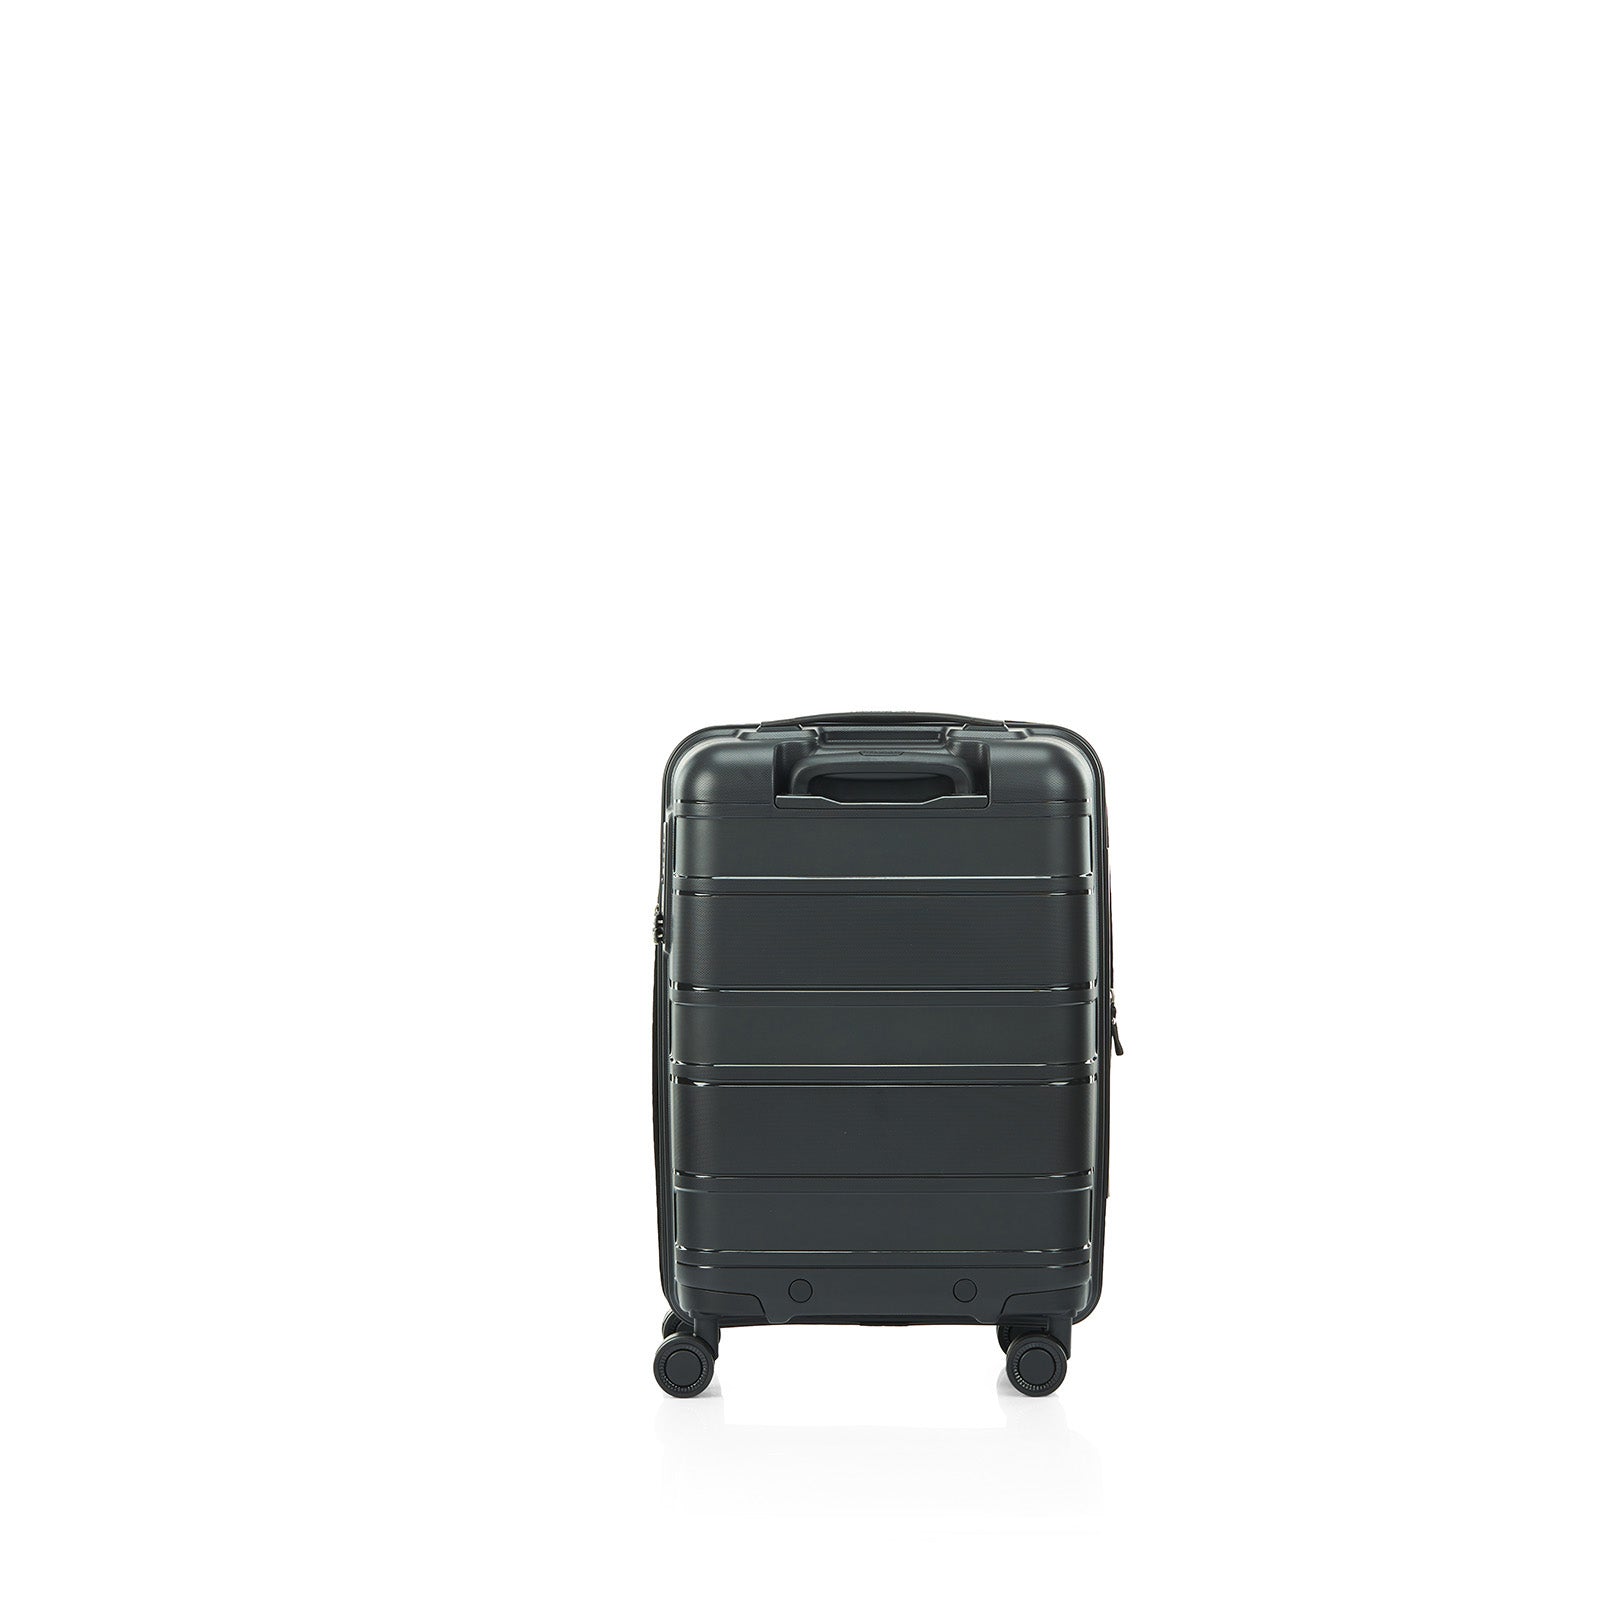 American-Tourister-Light-Max-55cm-Carry-On-Suitcase-Black-Back